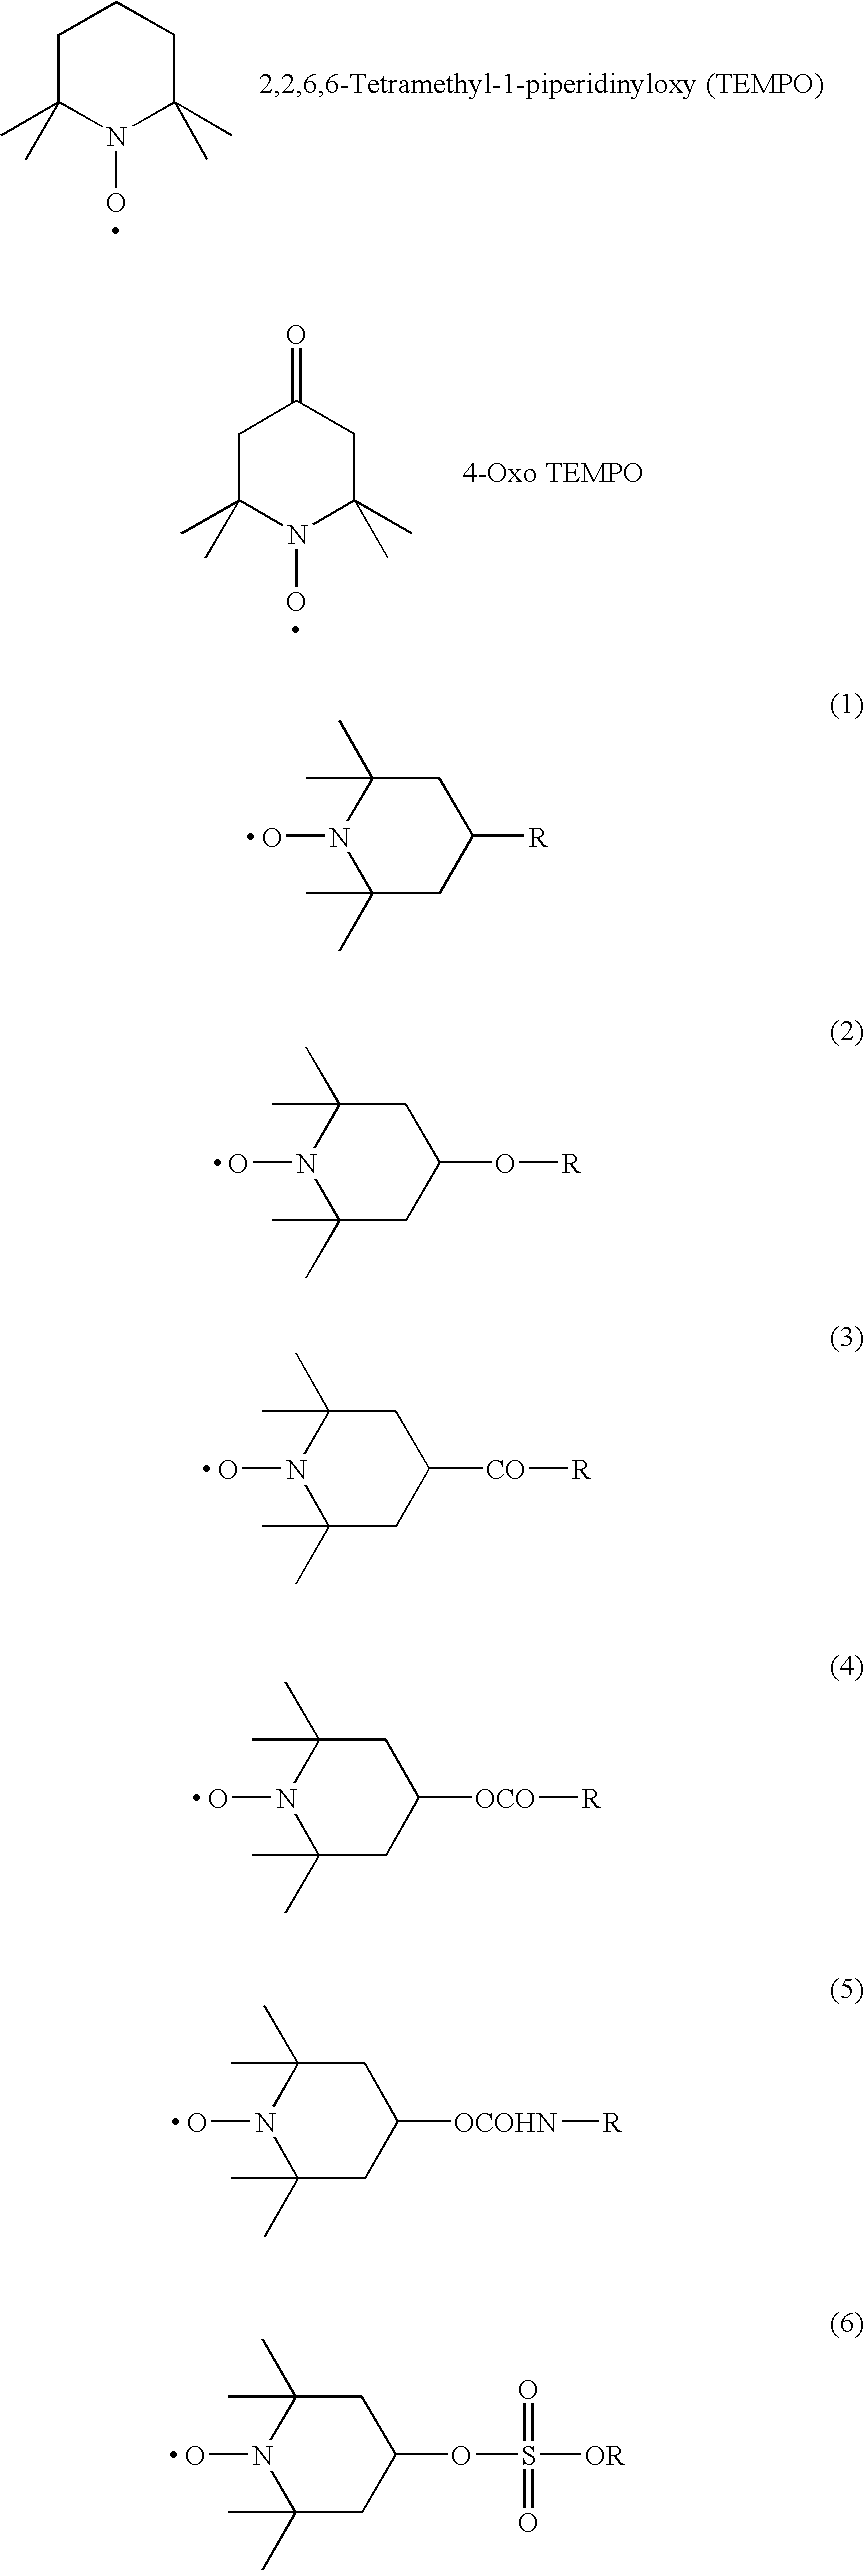 Process for modification of polymer